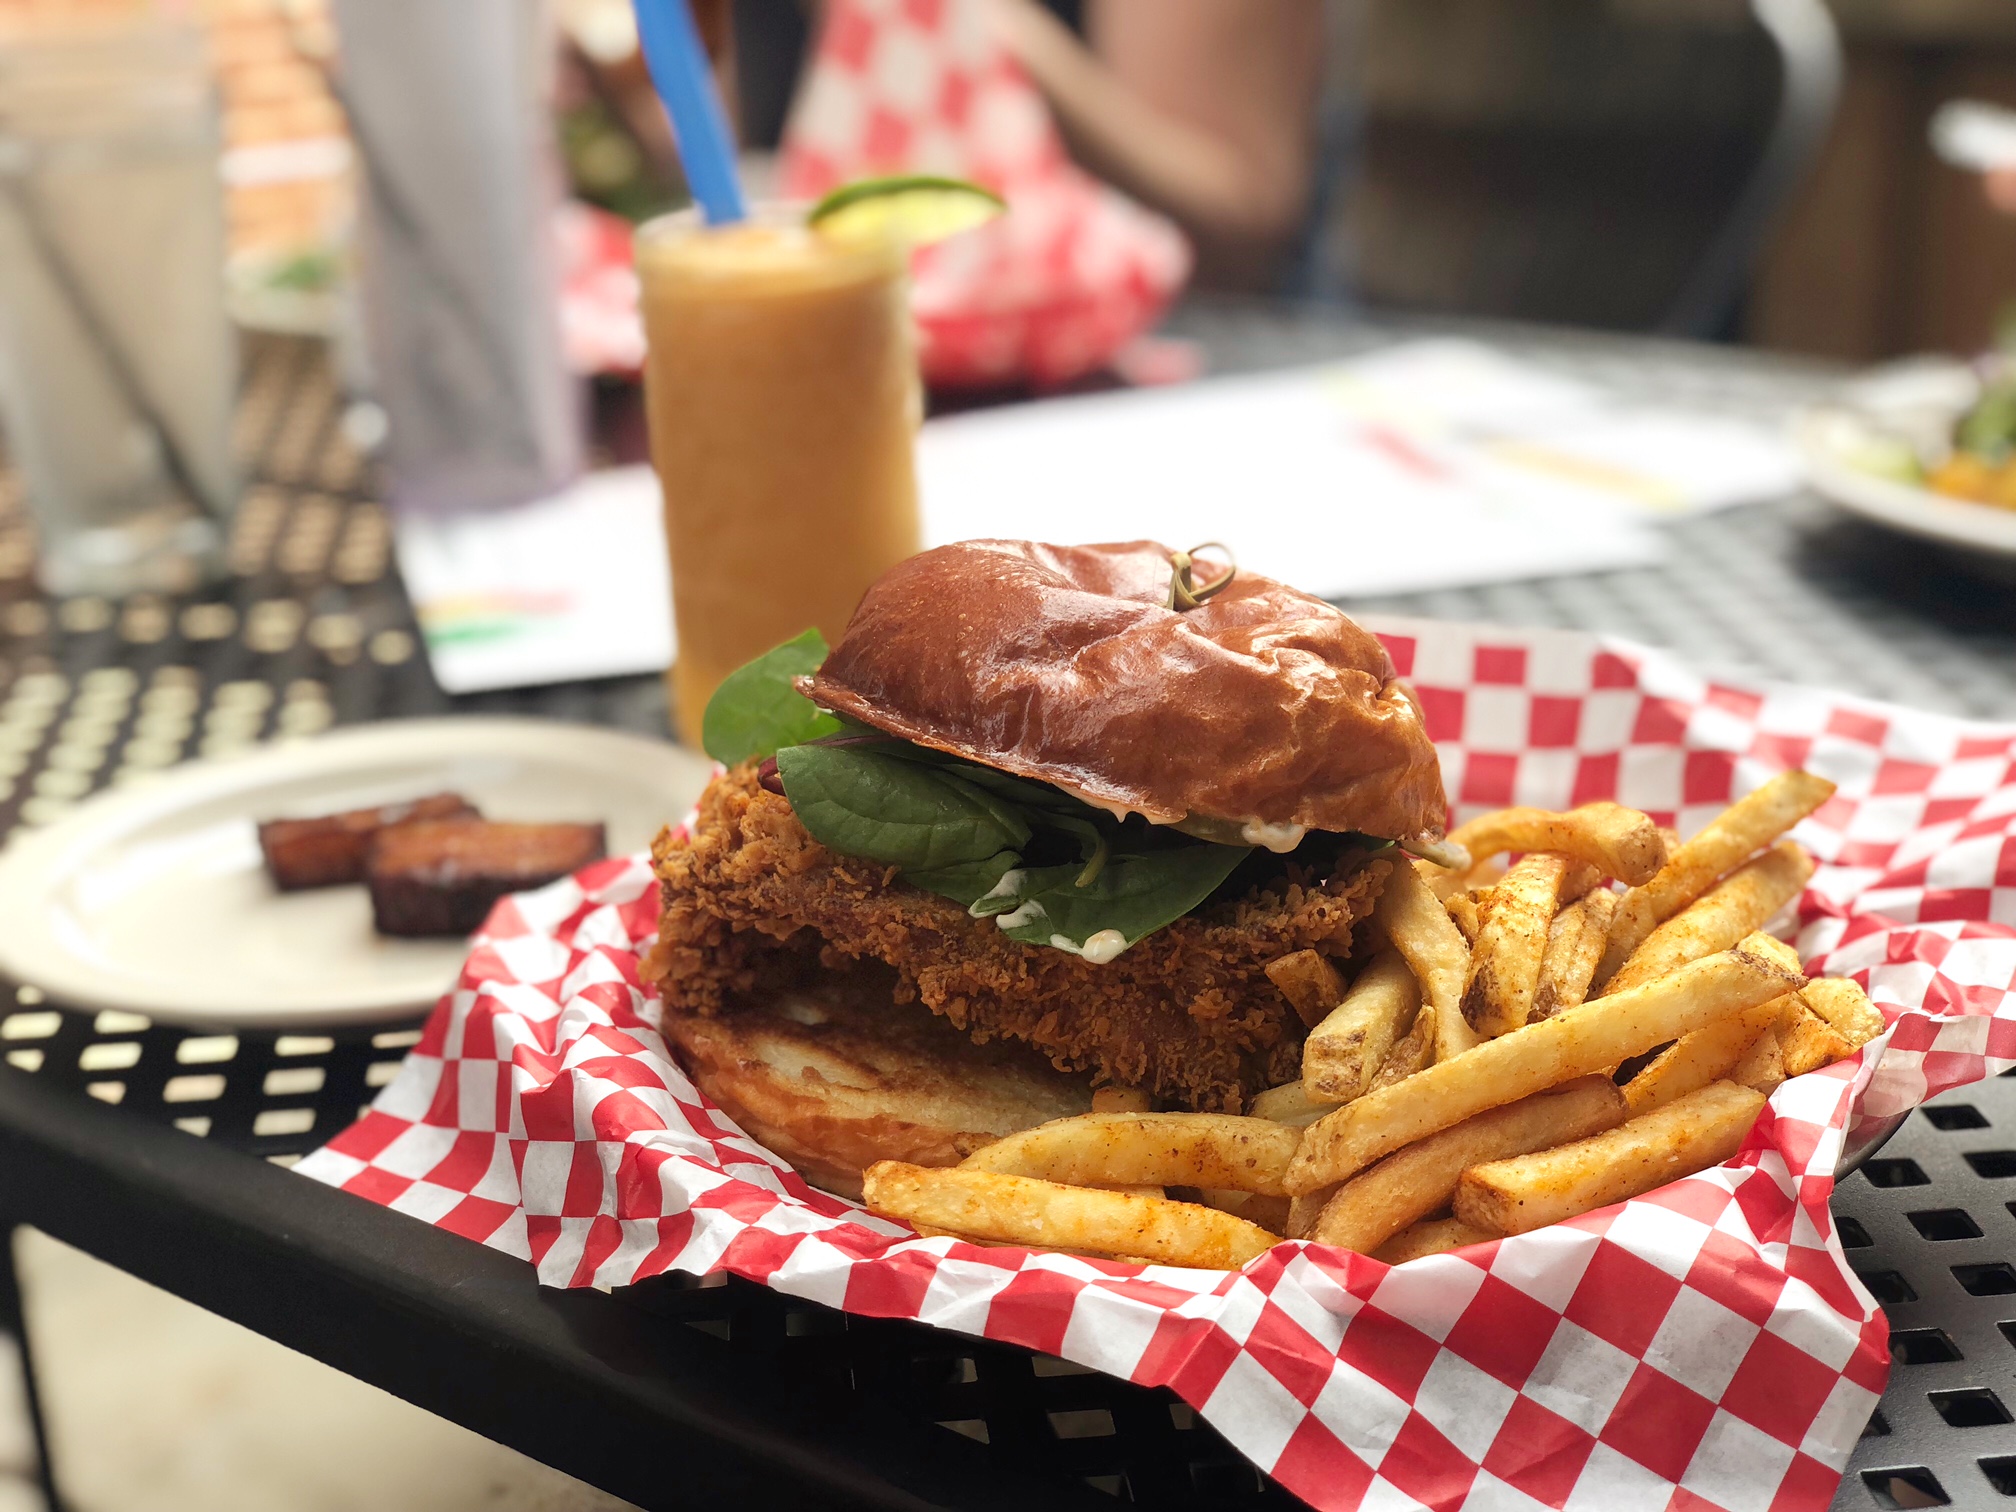 On a black patio table, there is a plate of food lined with a red-and-white checkered parchment paper. There is a fried chicken sandwich with fries and an orange cocktail behind it. Photo by Alyssa Buckley.